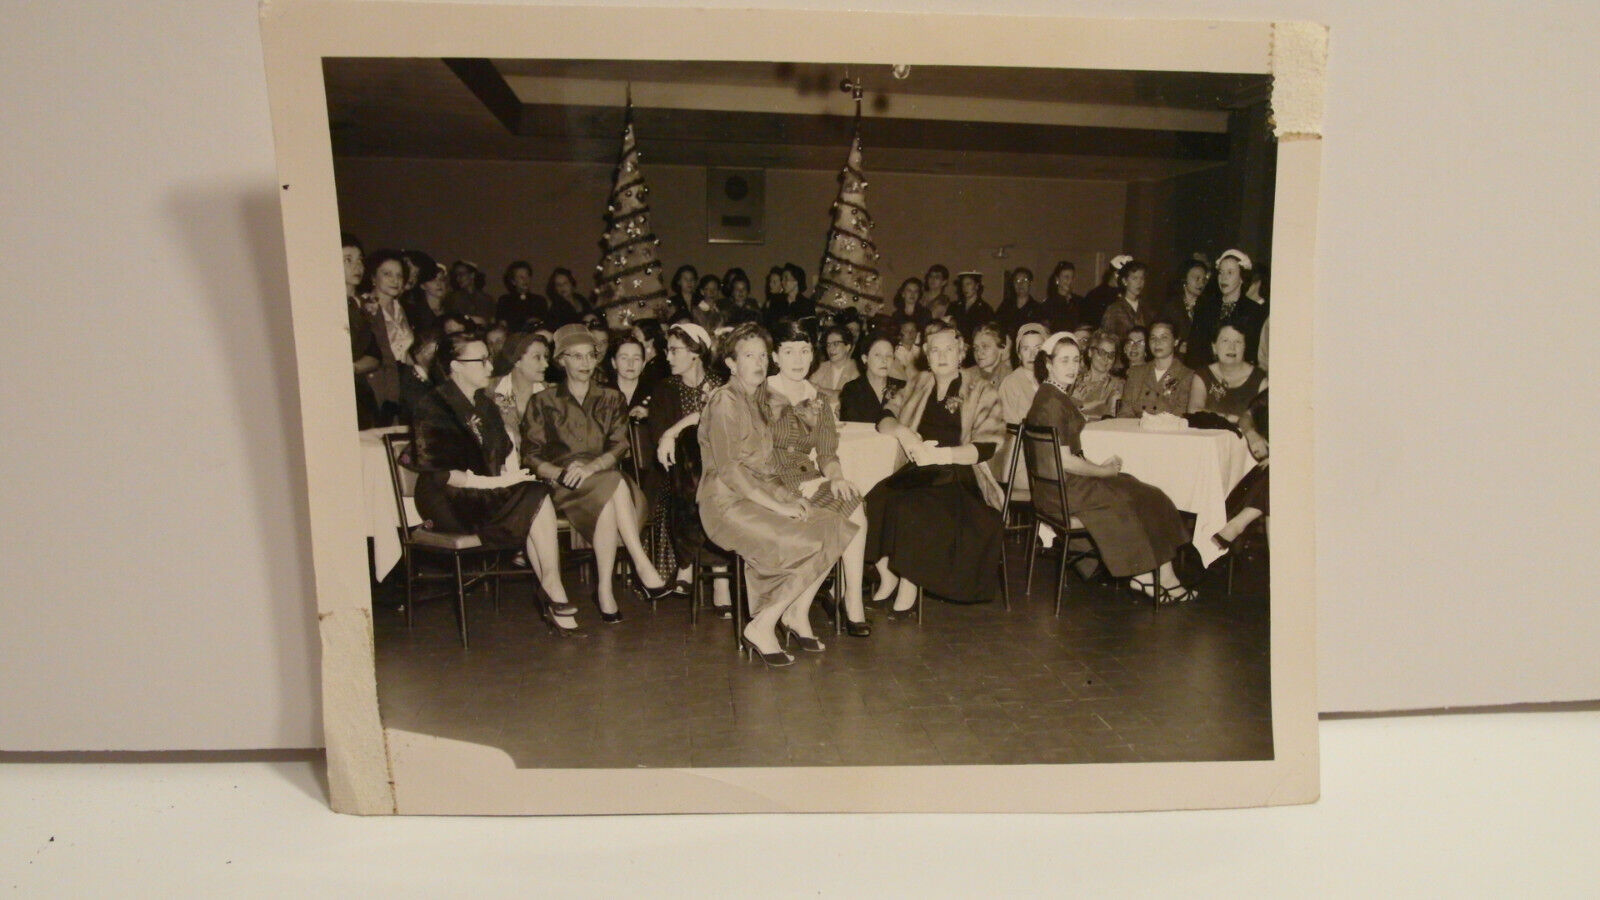 1956 VINTAGE FOUND PHOTOGRAPH OLD DATED PHOTO B&W CHRISTMAS COMMUNITY YEA PARTY